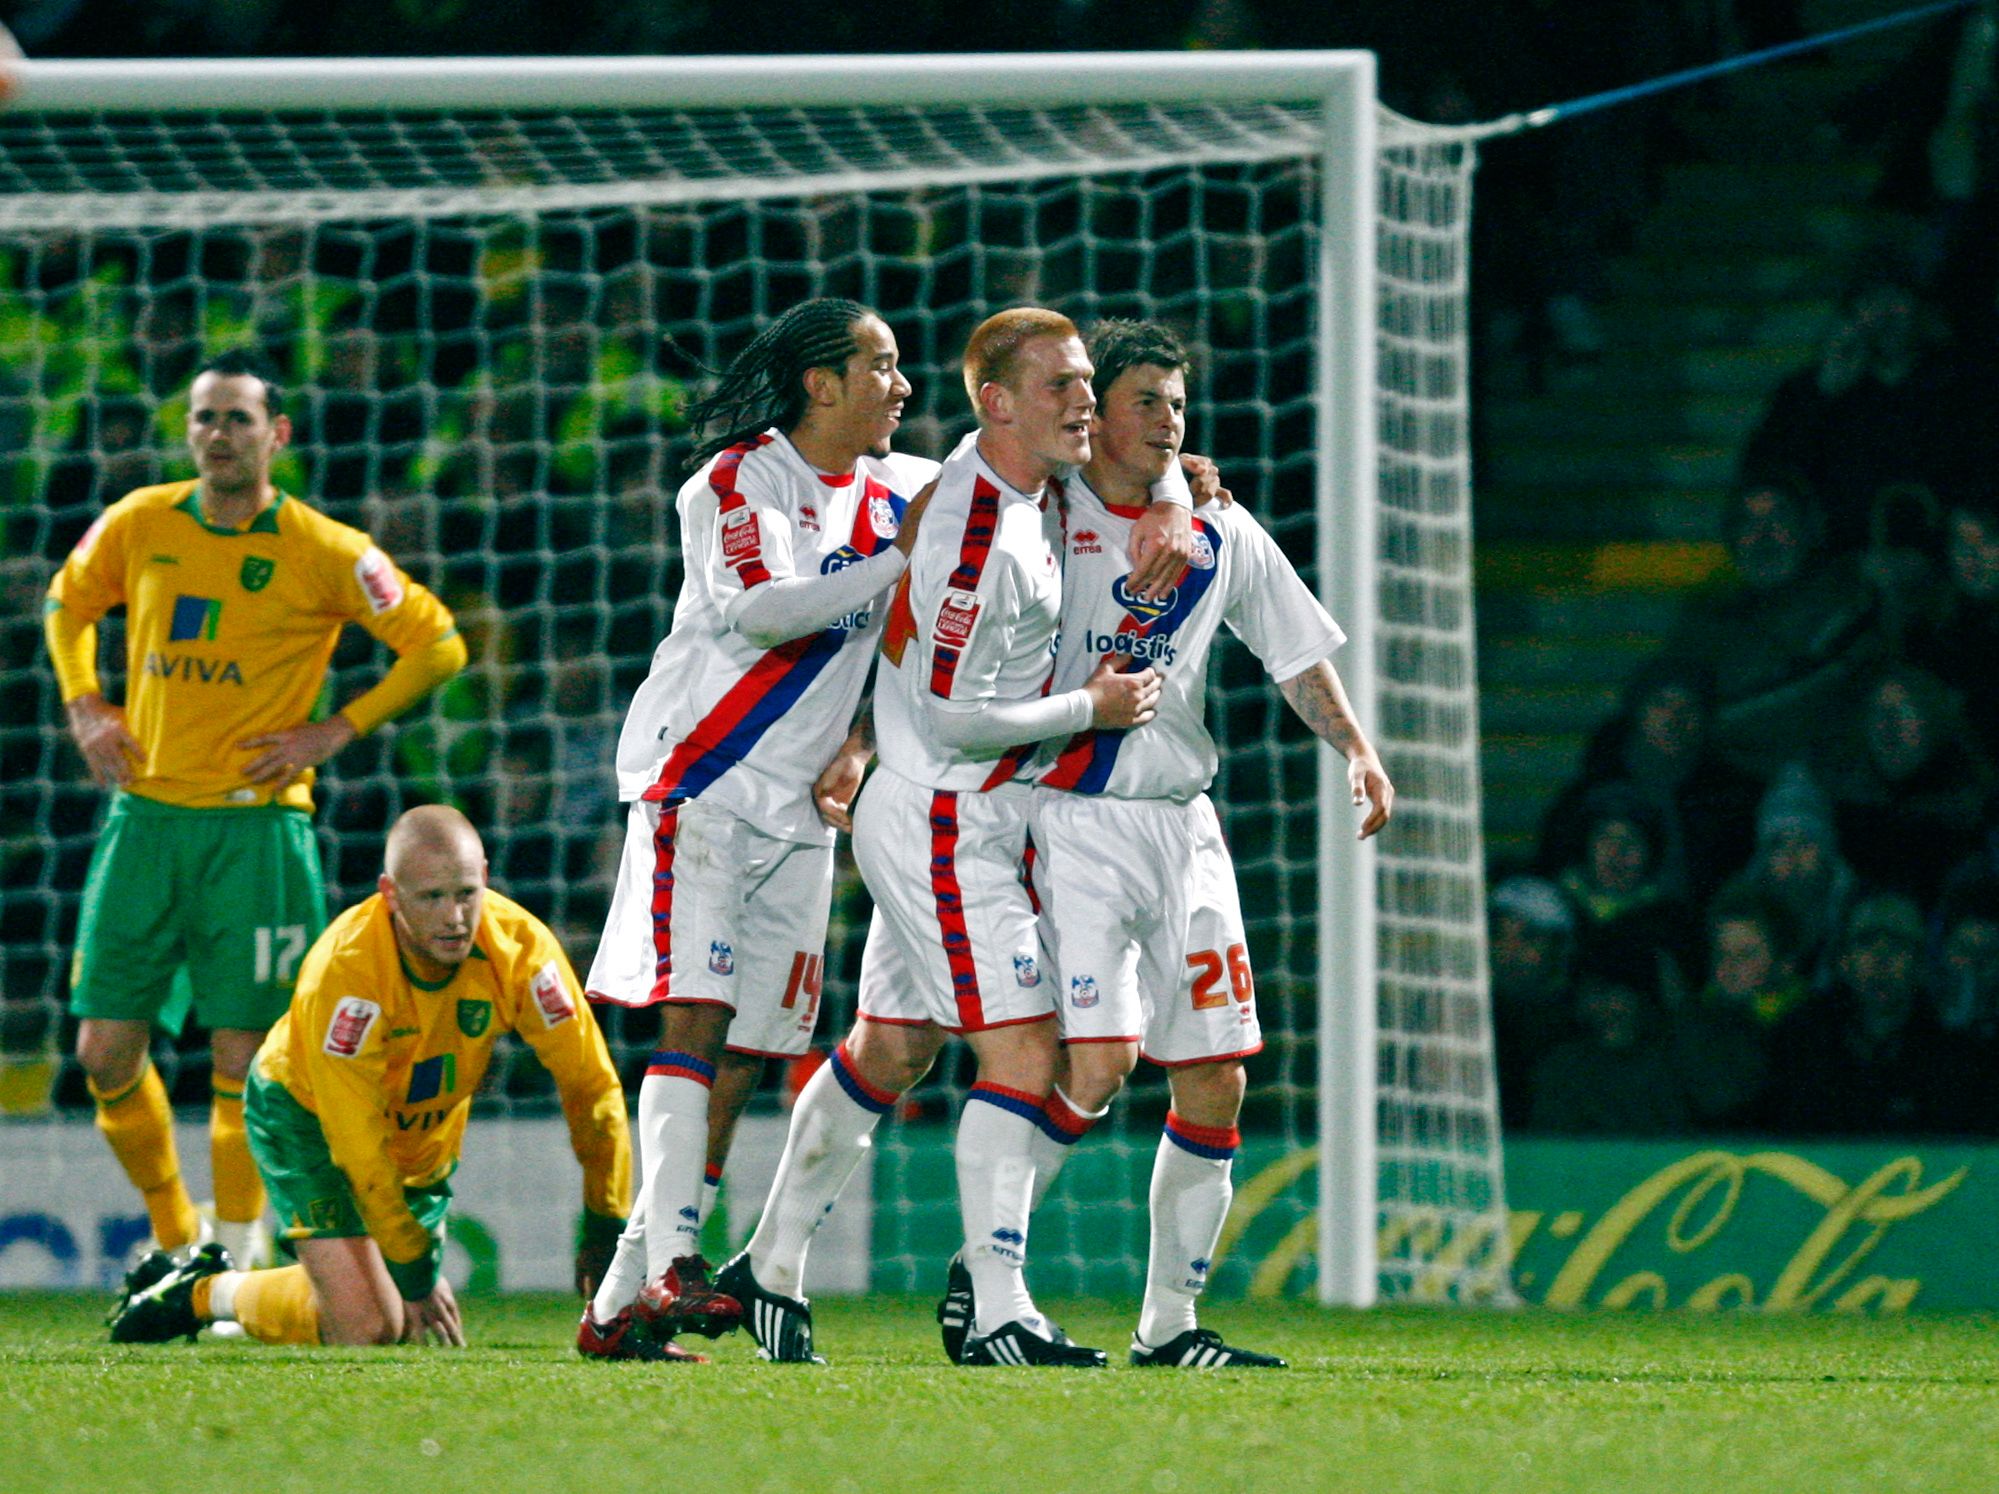 Football - Norwich City v Crystal Palace - Coca-Cola Football League Championship - Carrow Road - 08/09 - 25/11/08 
John Oster - Crystal Palace celebrates with team mates Sean Scanell and Ben Watson after scoring his teams second goal 
Mandatory Credit: Action Images / Paul Harding